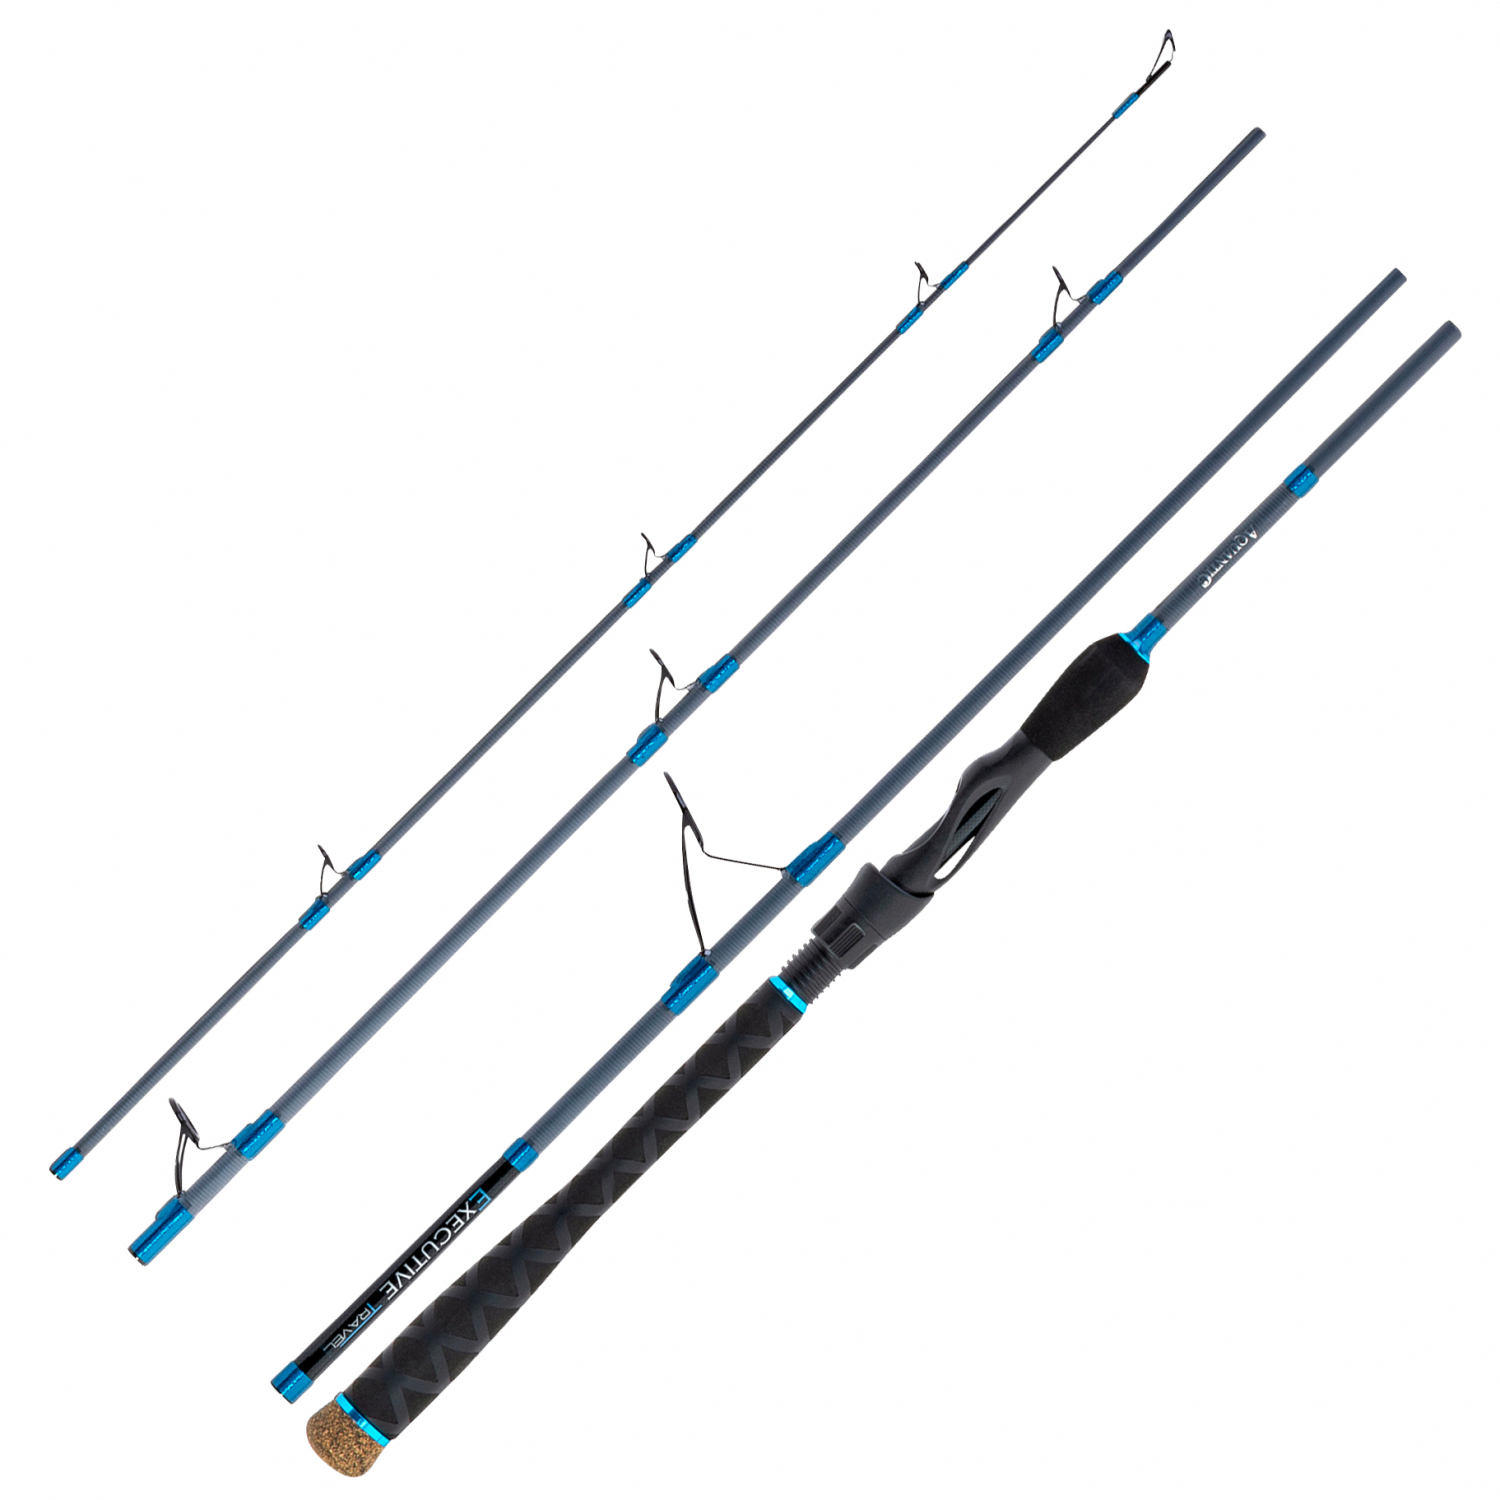 Aquantic Executive Travel fishing rod at low prices